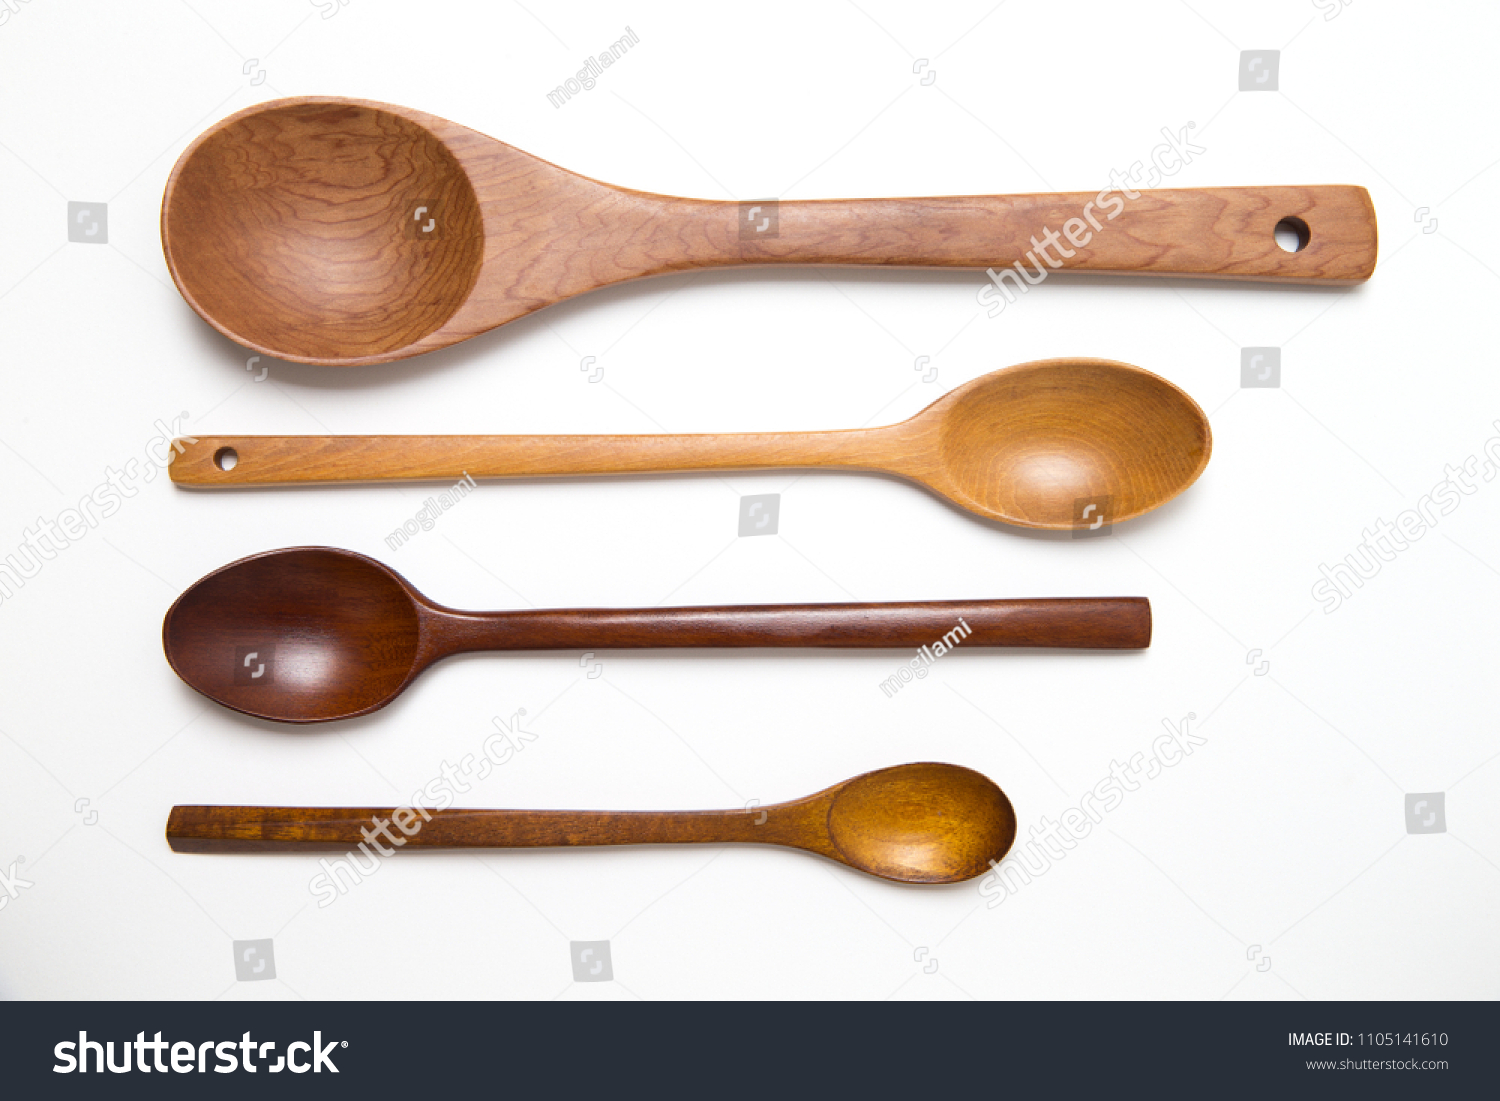 empty Spoons of different sizes with copy space. four wooden spoons on white background for text.
 #1105141610